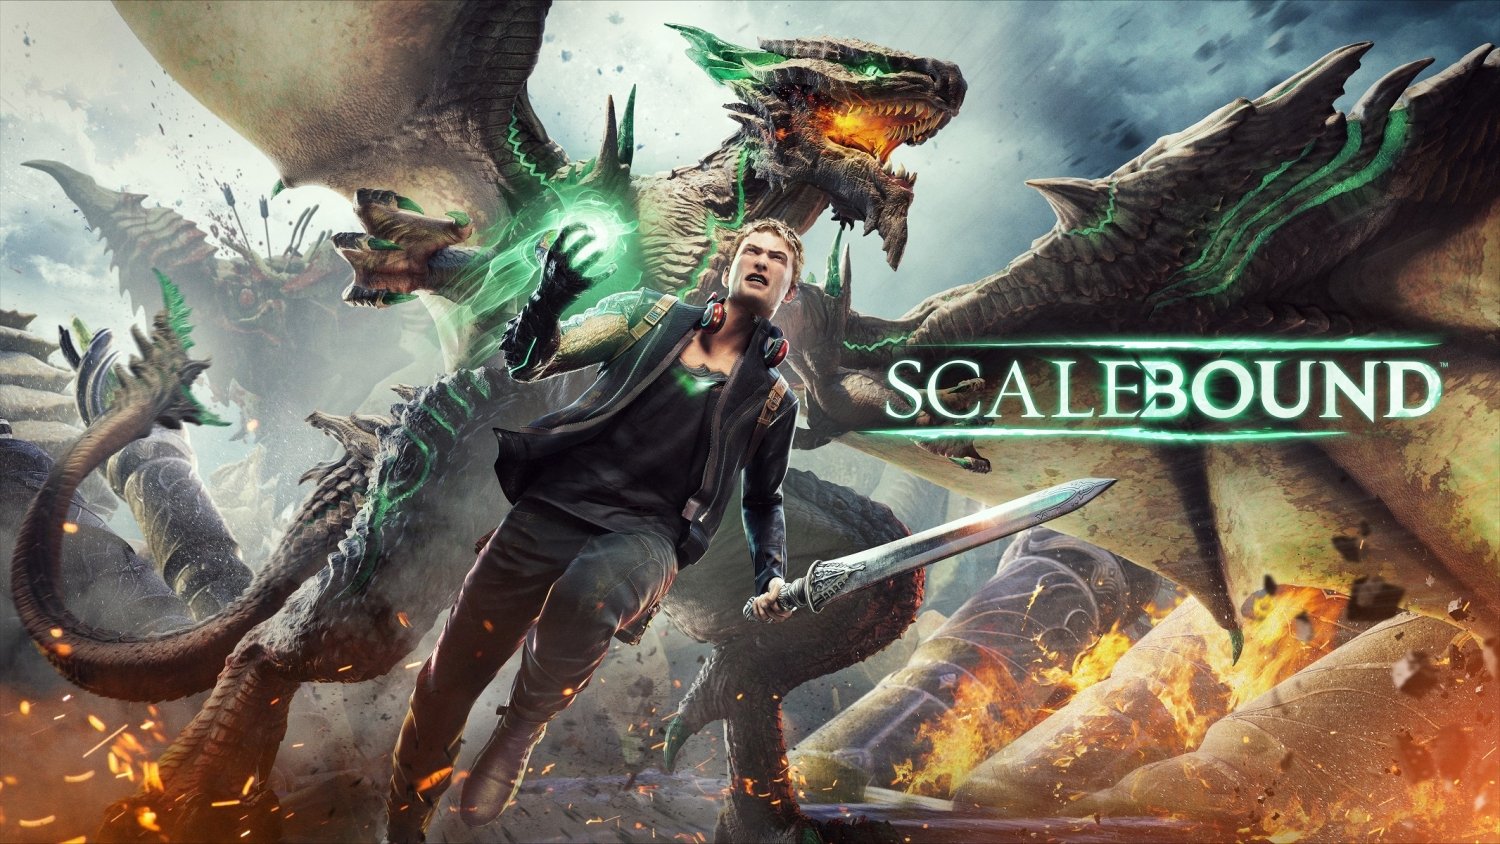 71095_89_ex-platinumgames-dev-on-scalebound-we-had-our-chance-and-we-failed_full.jpg